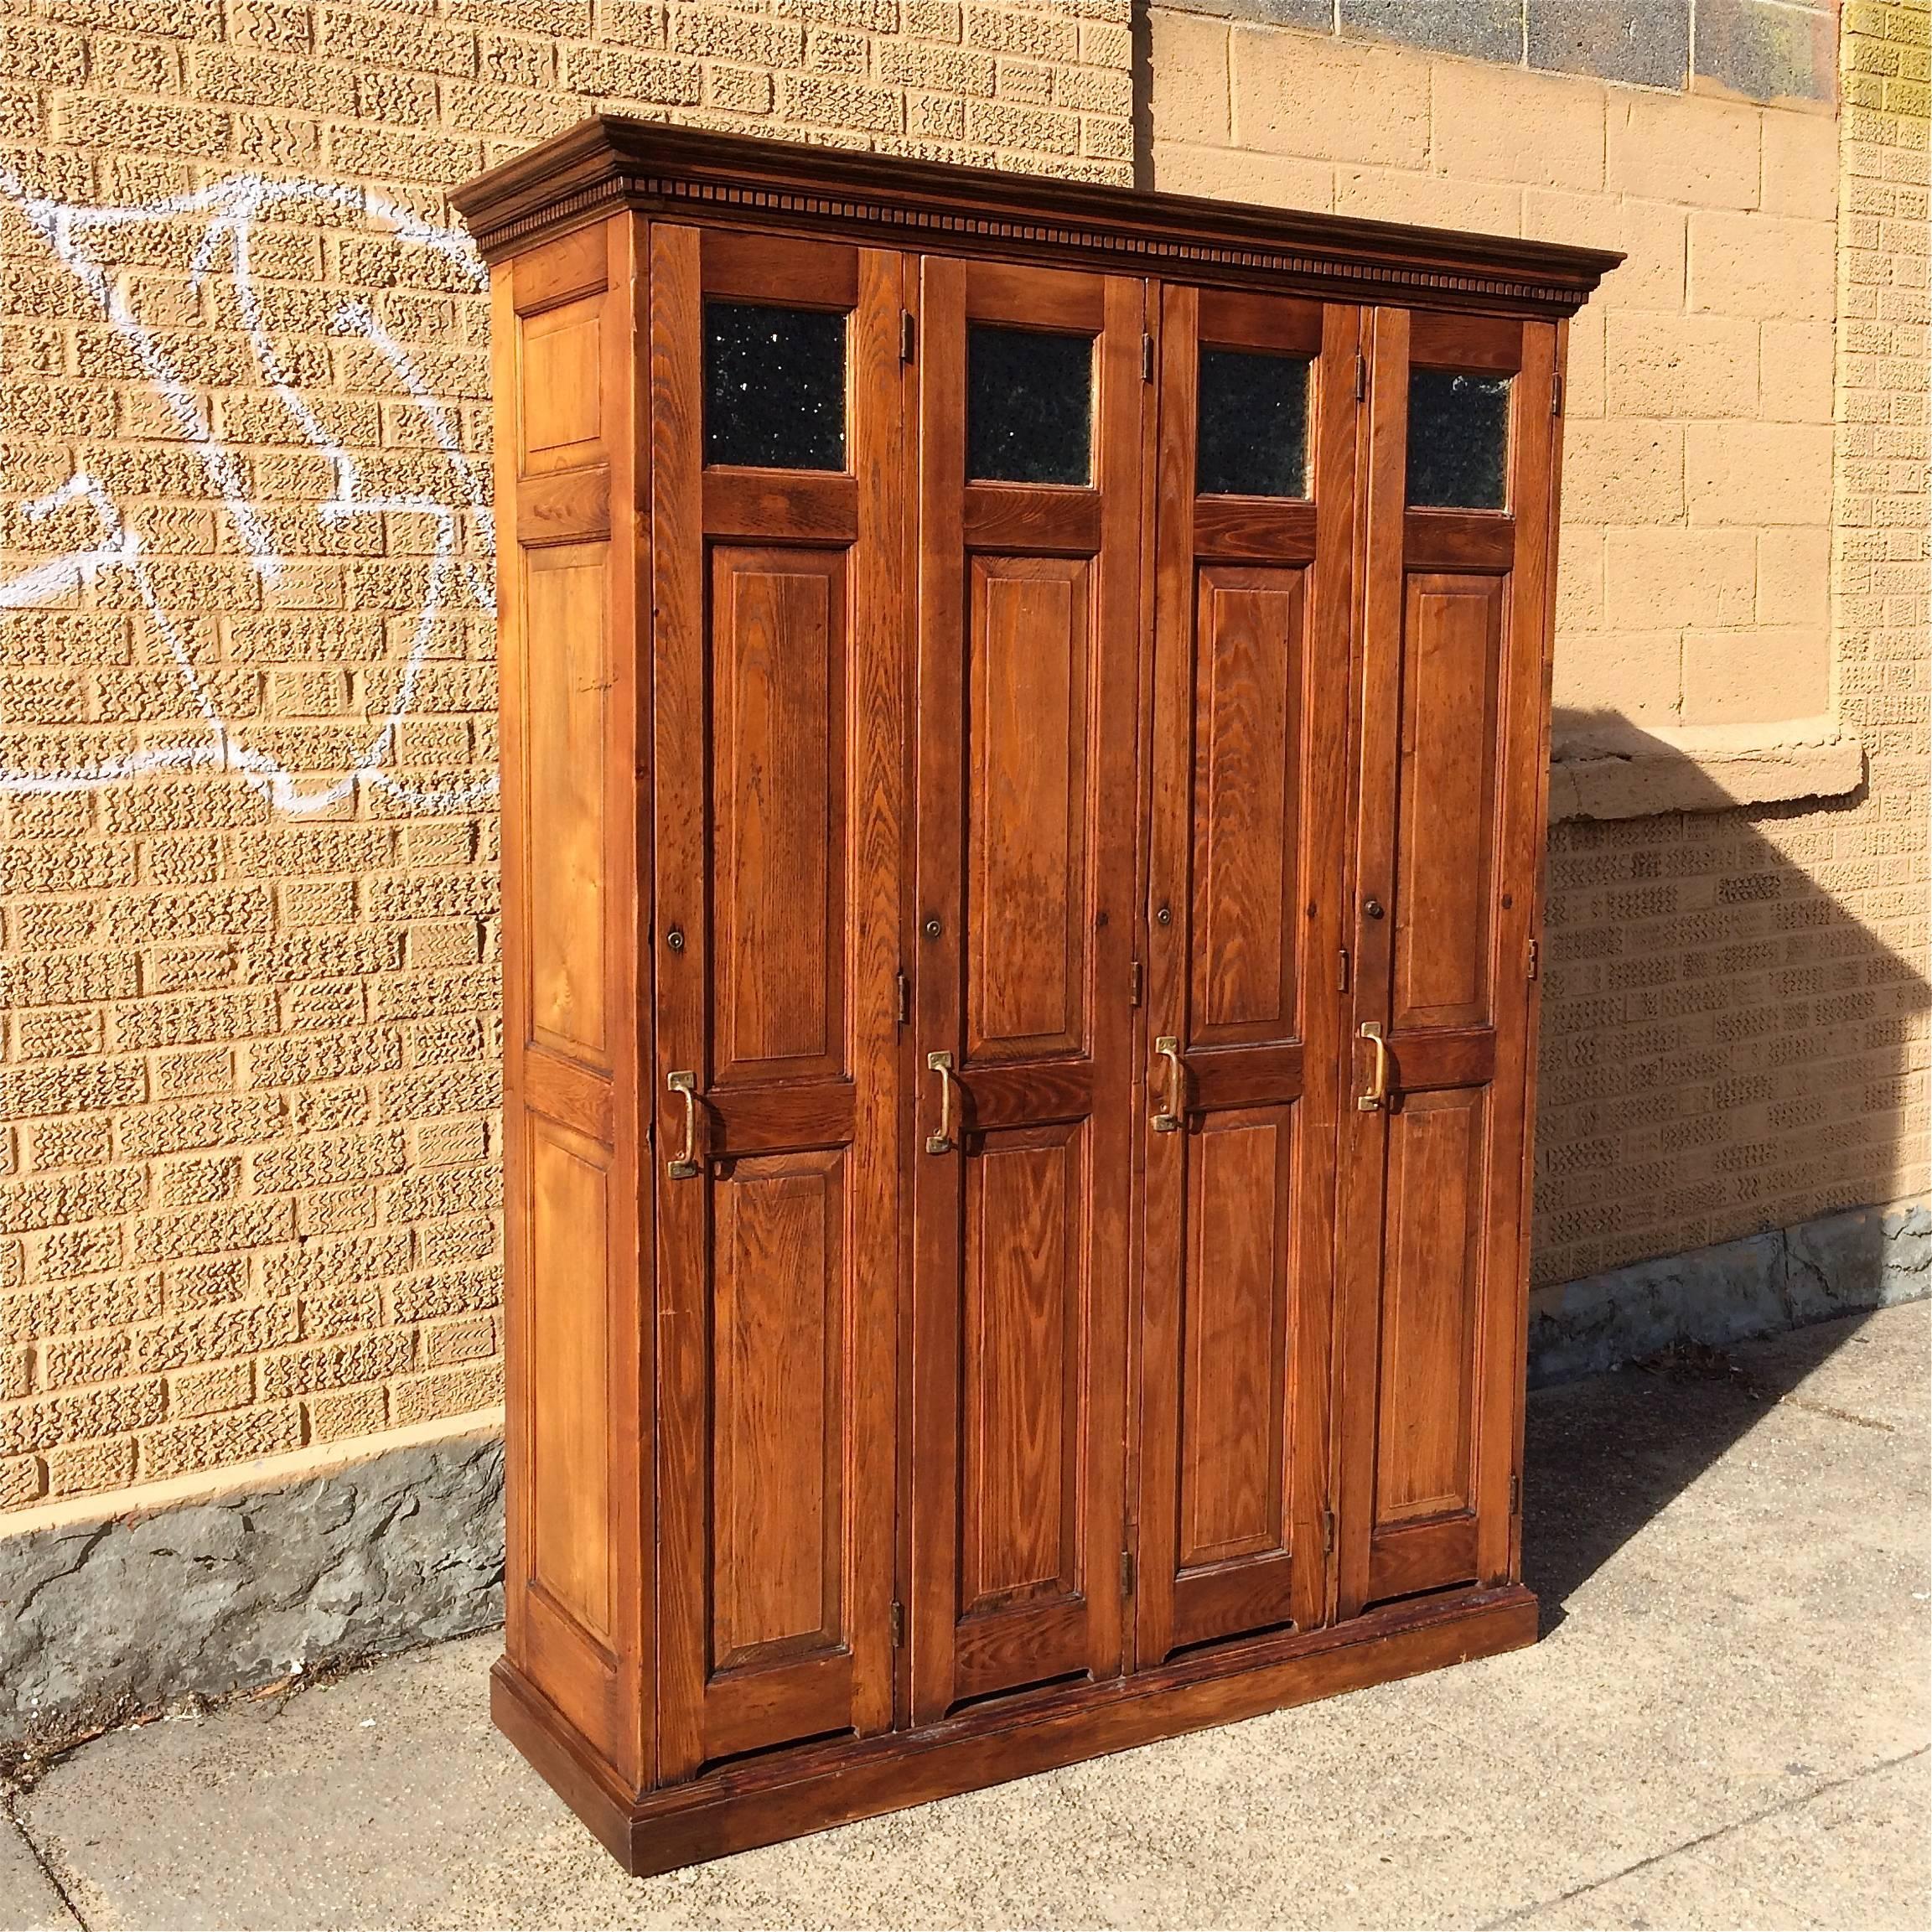 Row of four, antique, late 19th century, oak, police lockers with brass handles and textured glass windows. Locker interiors are painted black. 52.25